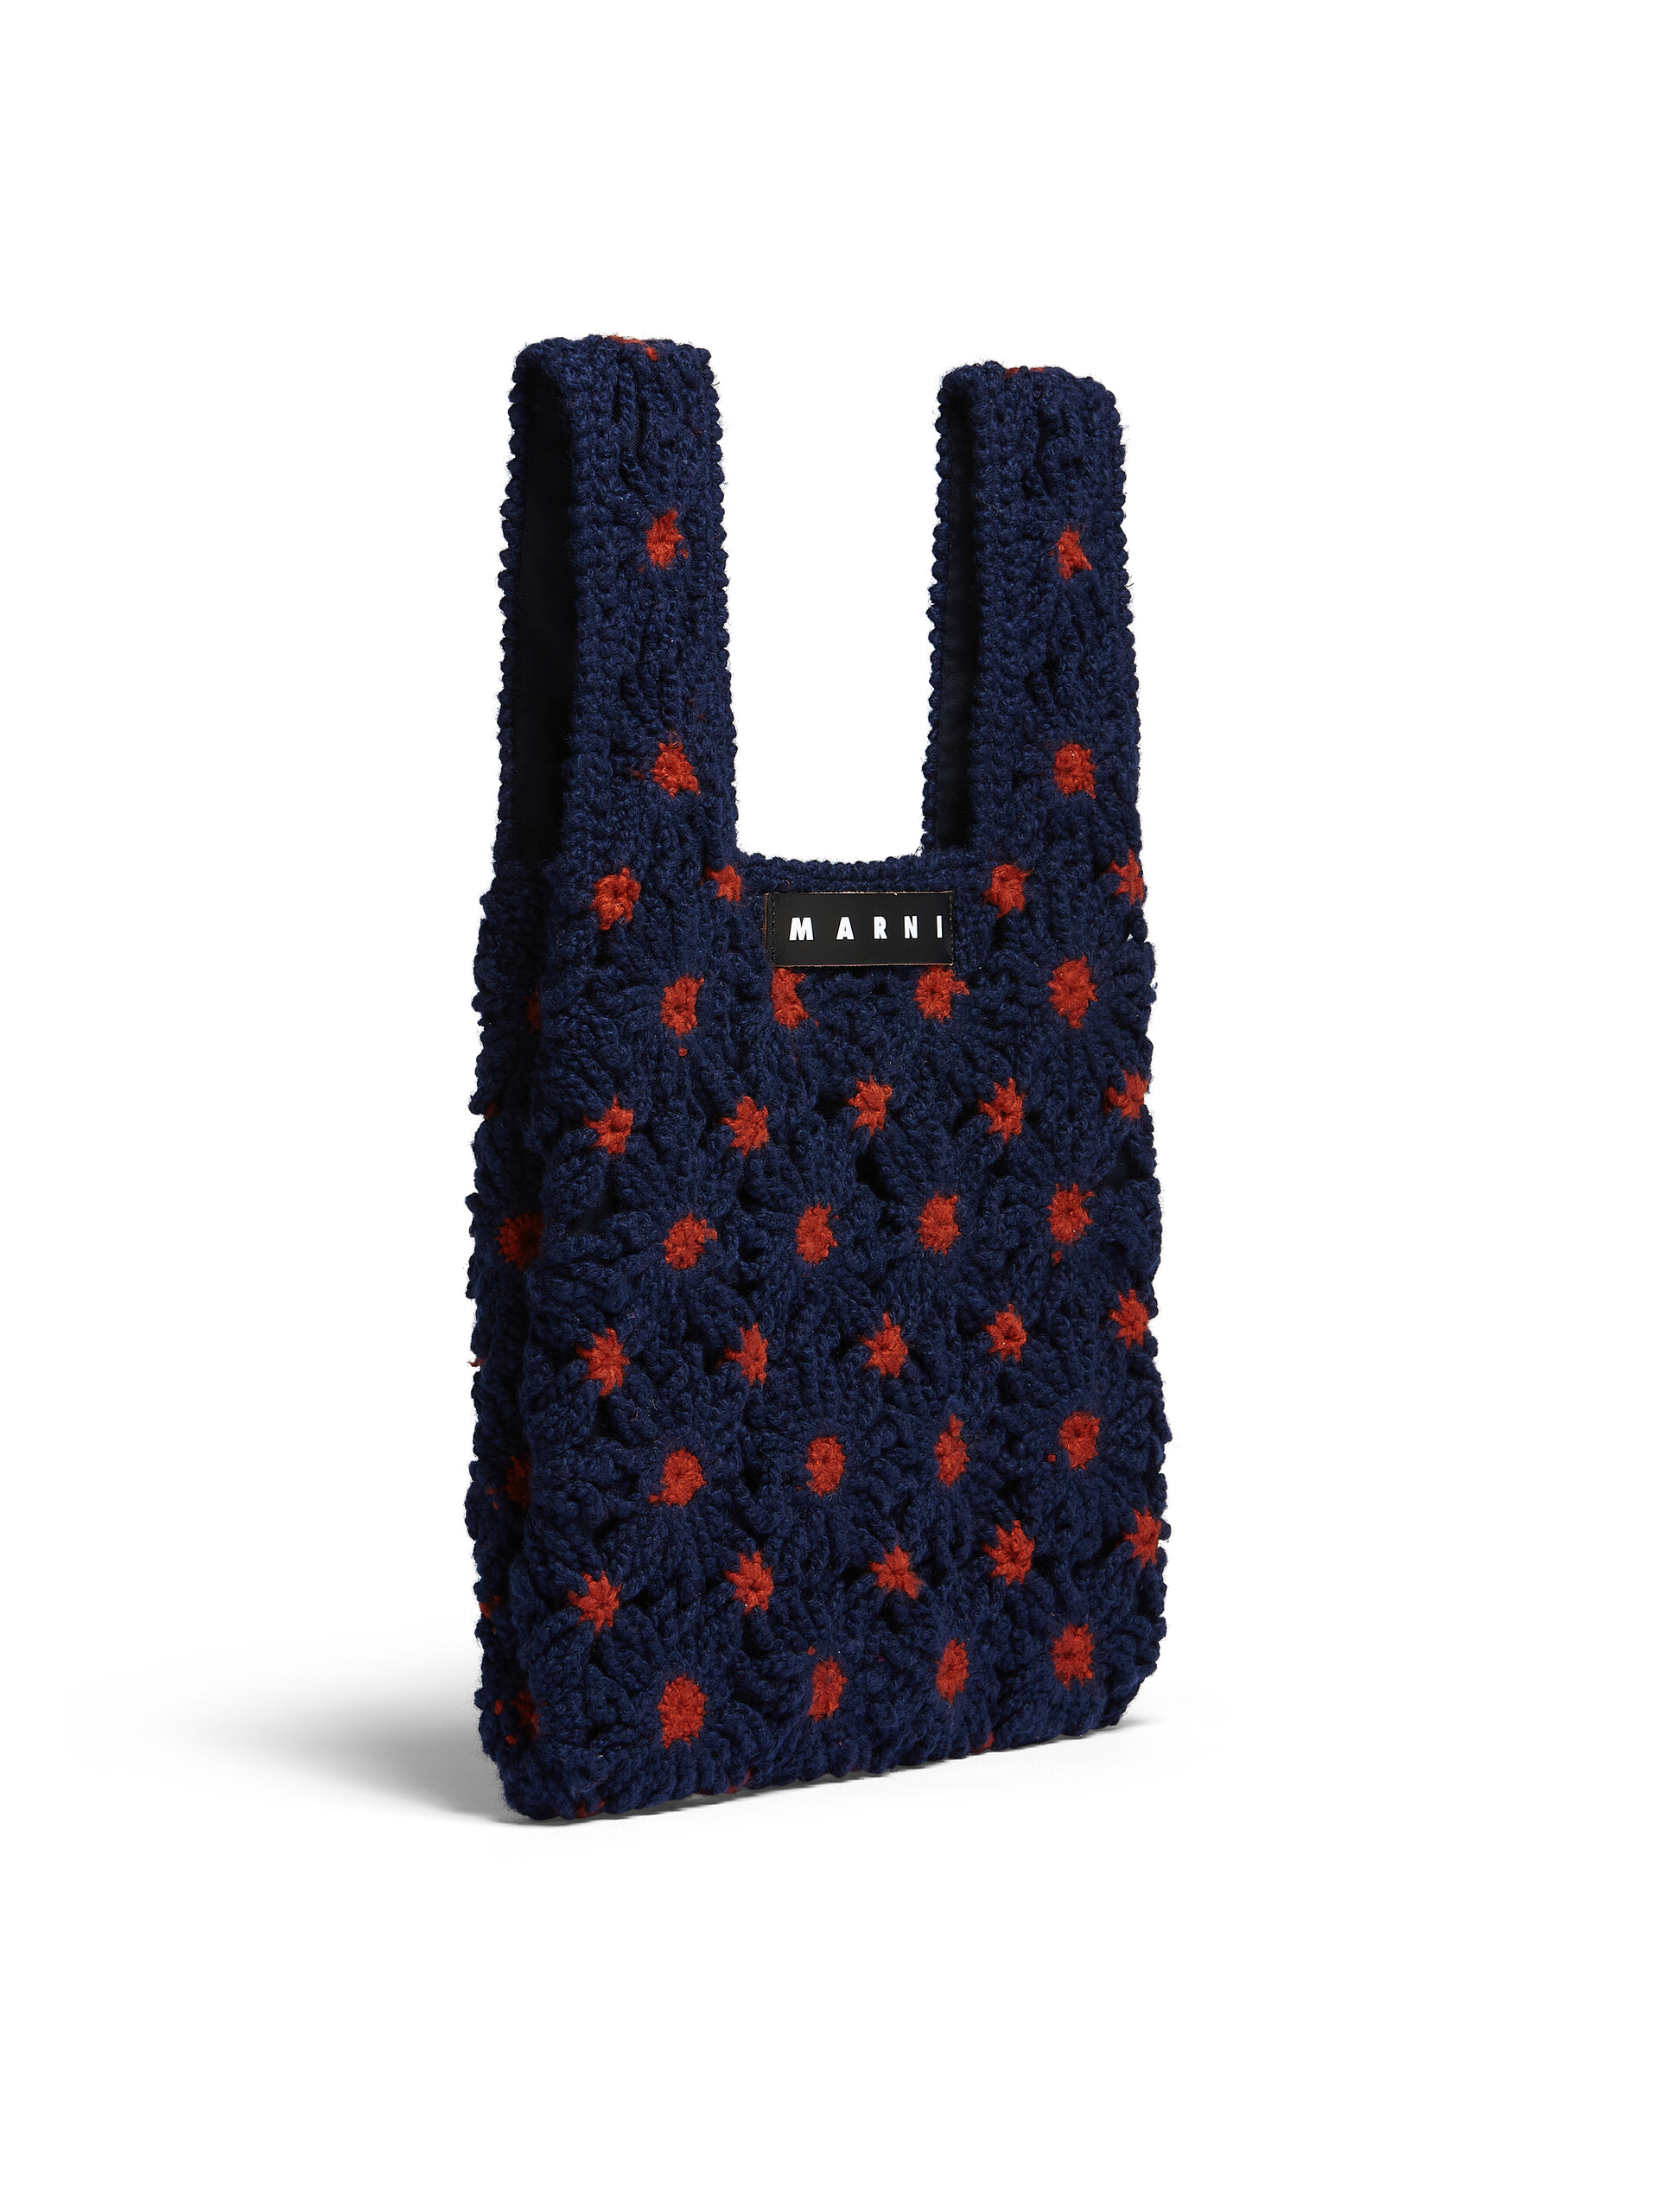 MARNI MARKET FISH bag in blue and red crochet - Shopping Bags - Image 2